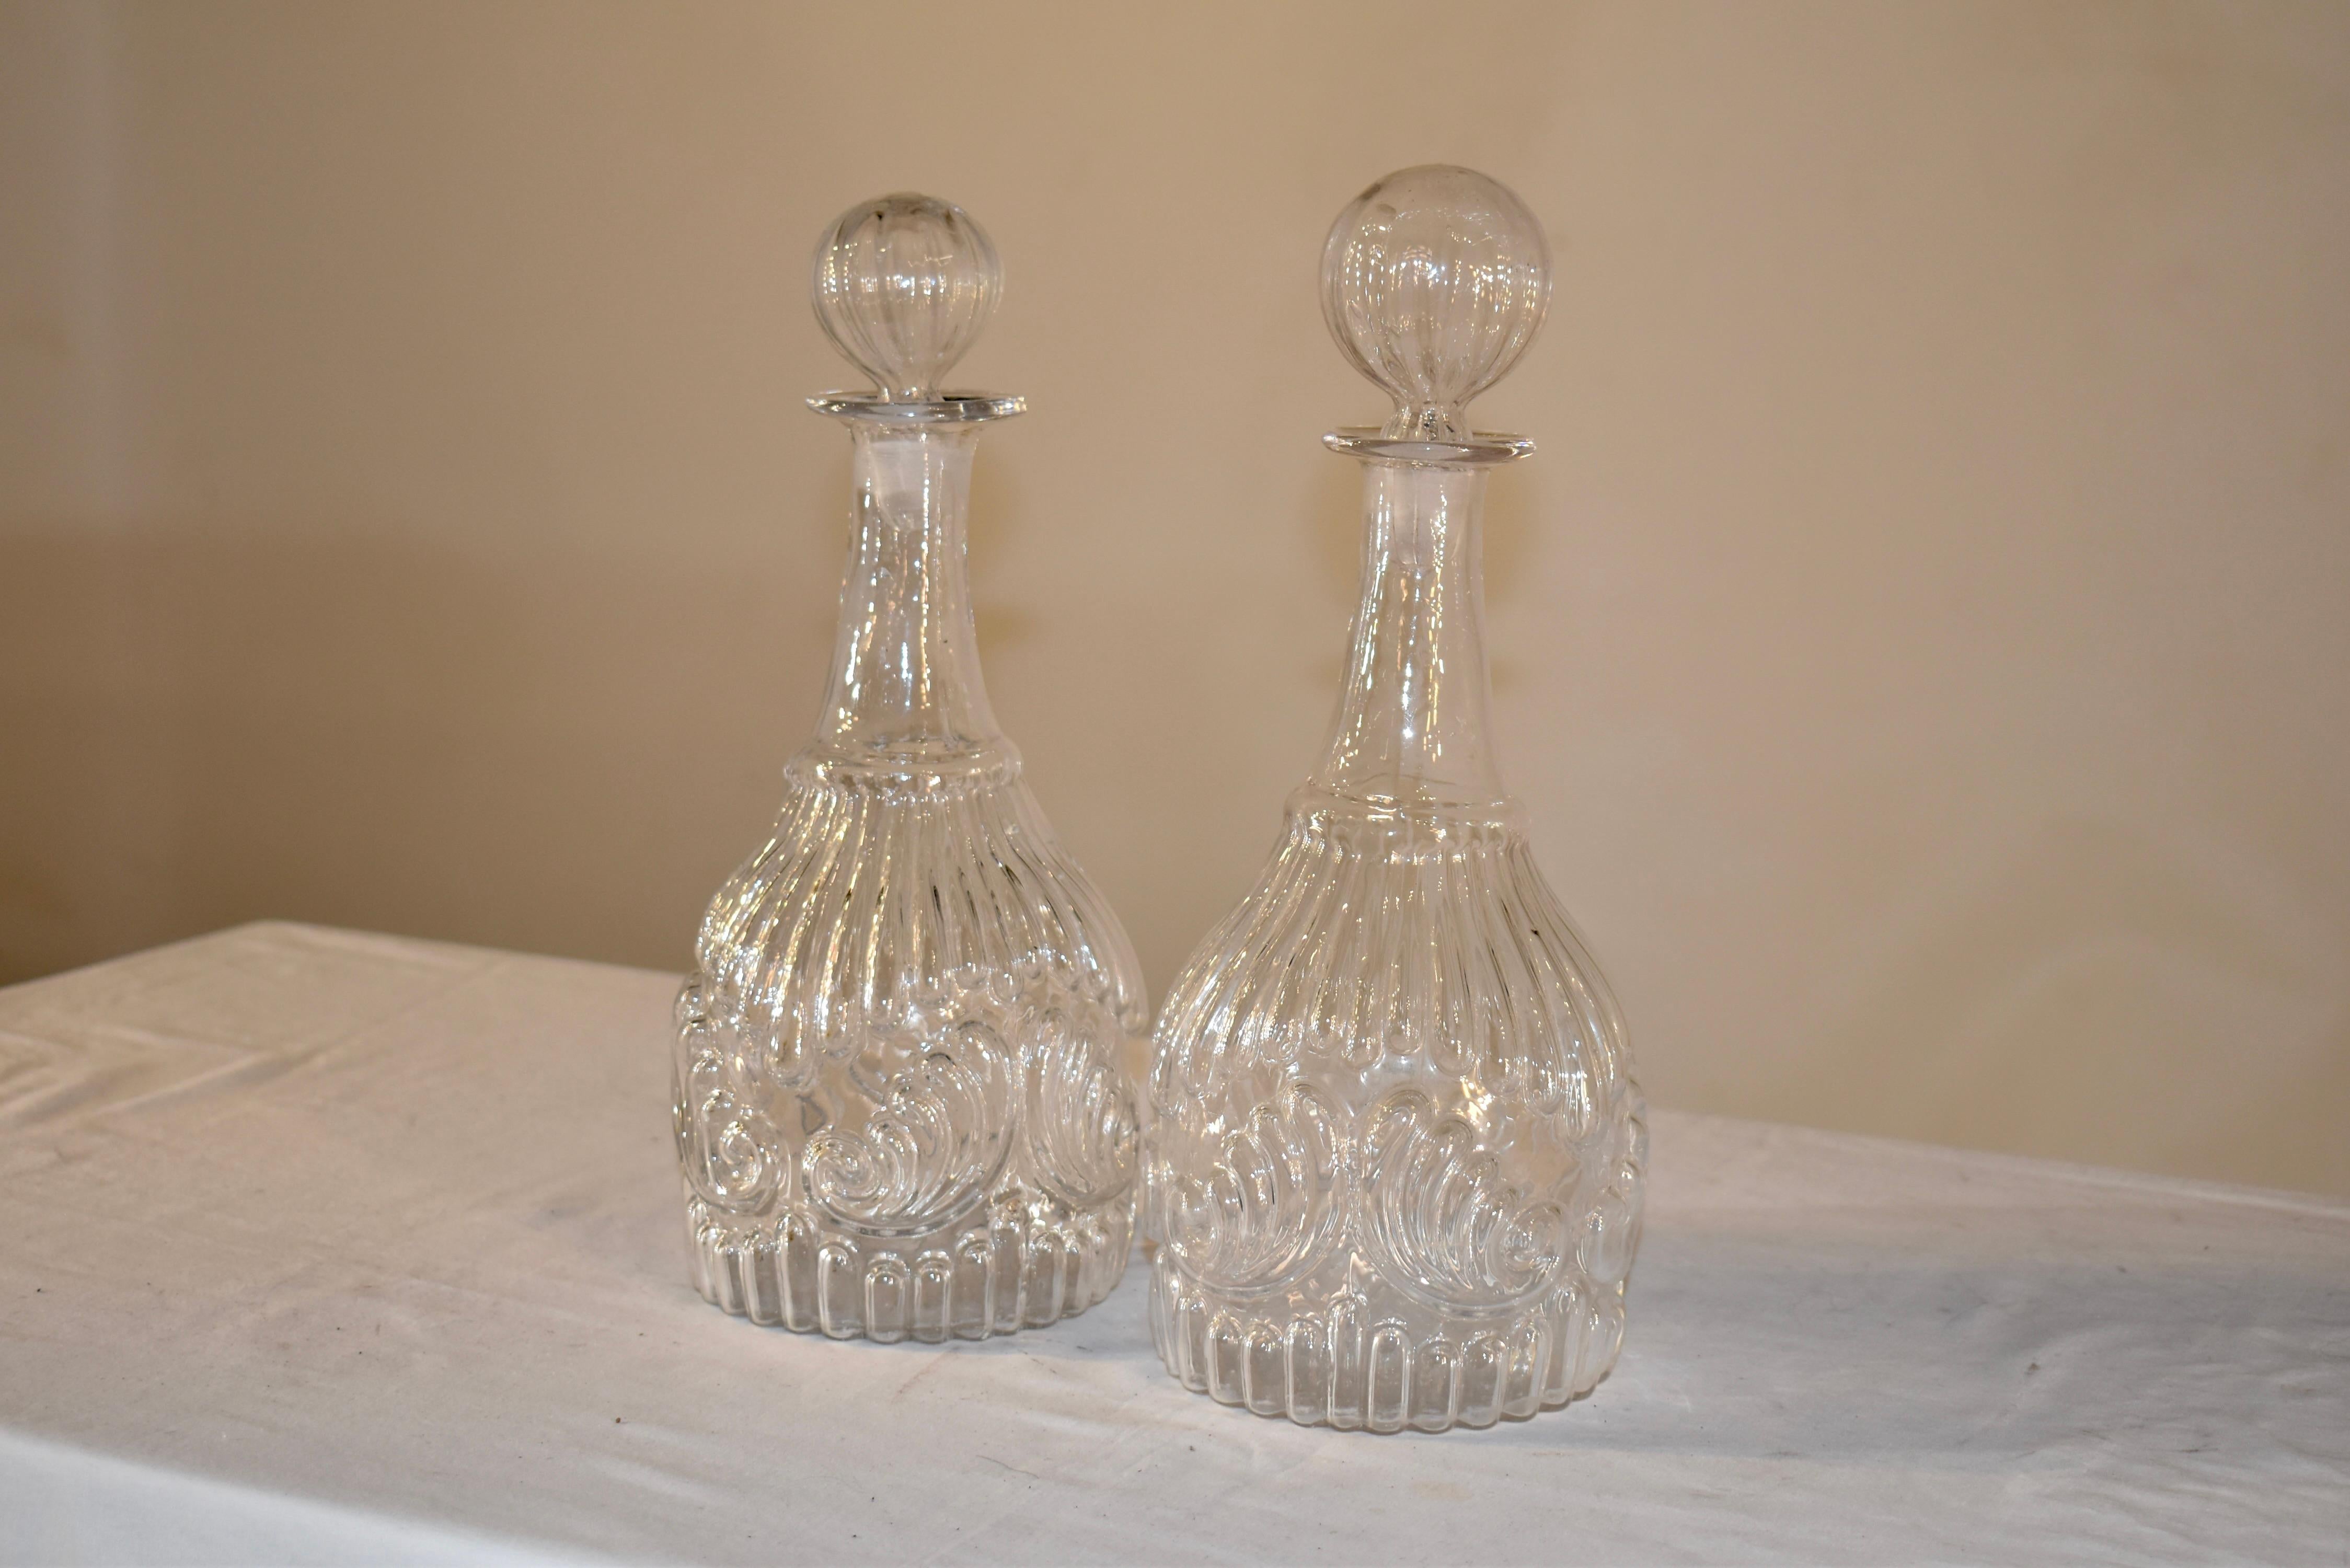 Pair of early 19th century hand mold blown glass decanters.  These are a gorgeous pair of molded glass decanters, probably from New England.  The glass trade was very popular in the 19th century of our budding country, as the people wanted more